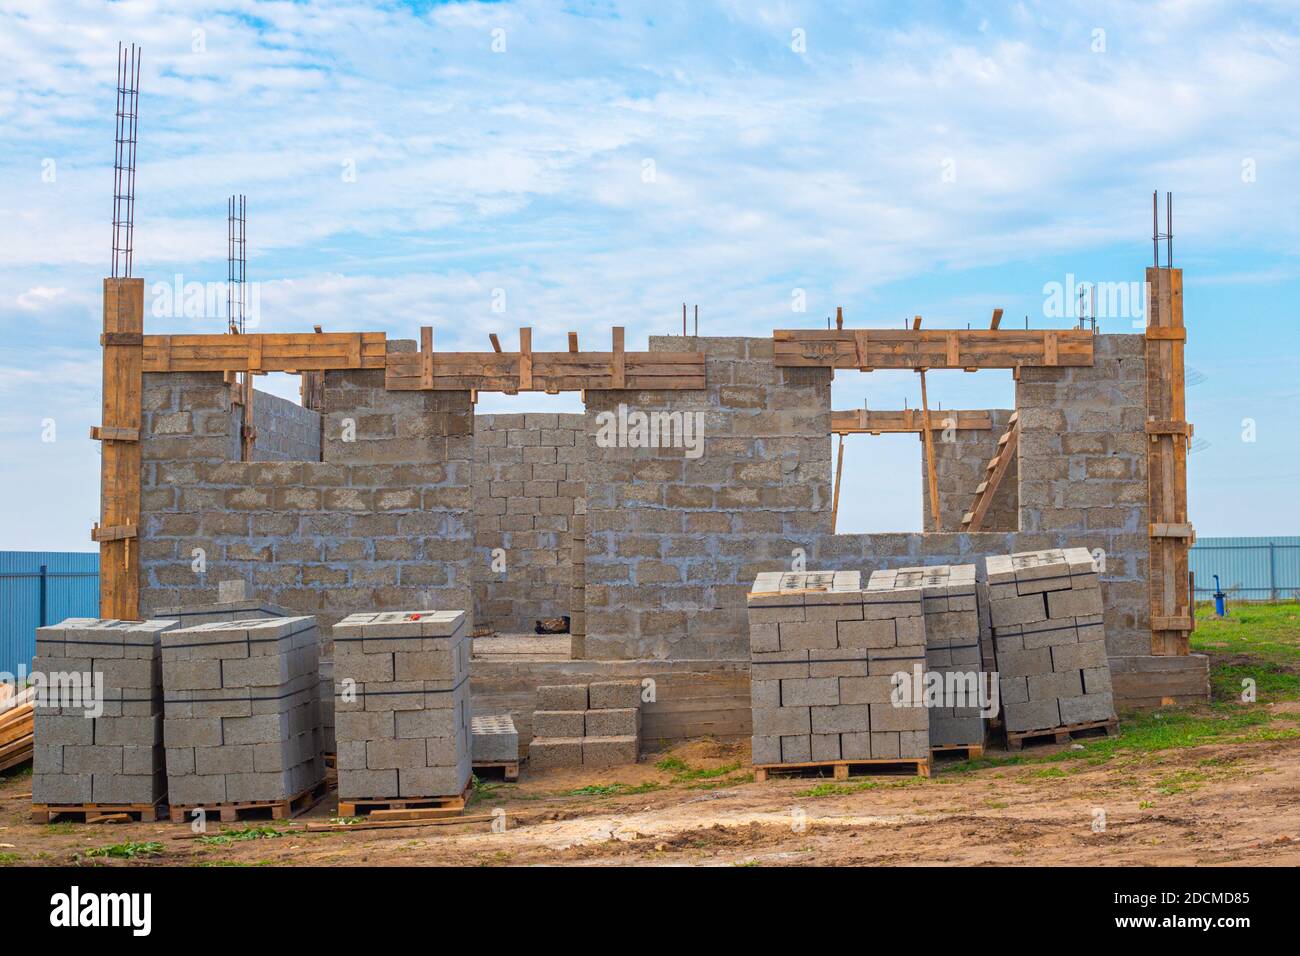 Construction stages. Cinder block house with protruding fittings, ground floor. Building material stacked on pallets. Stock Photo